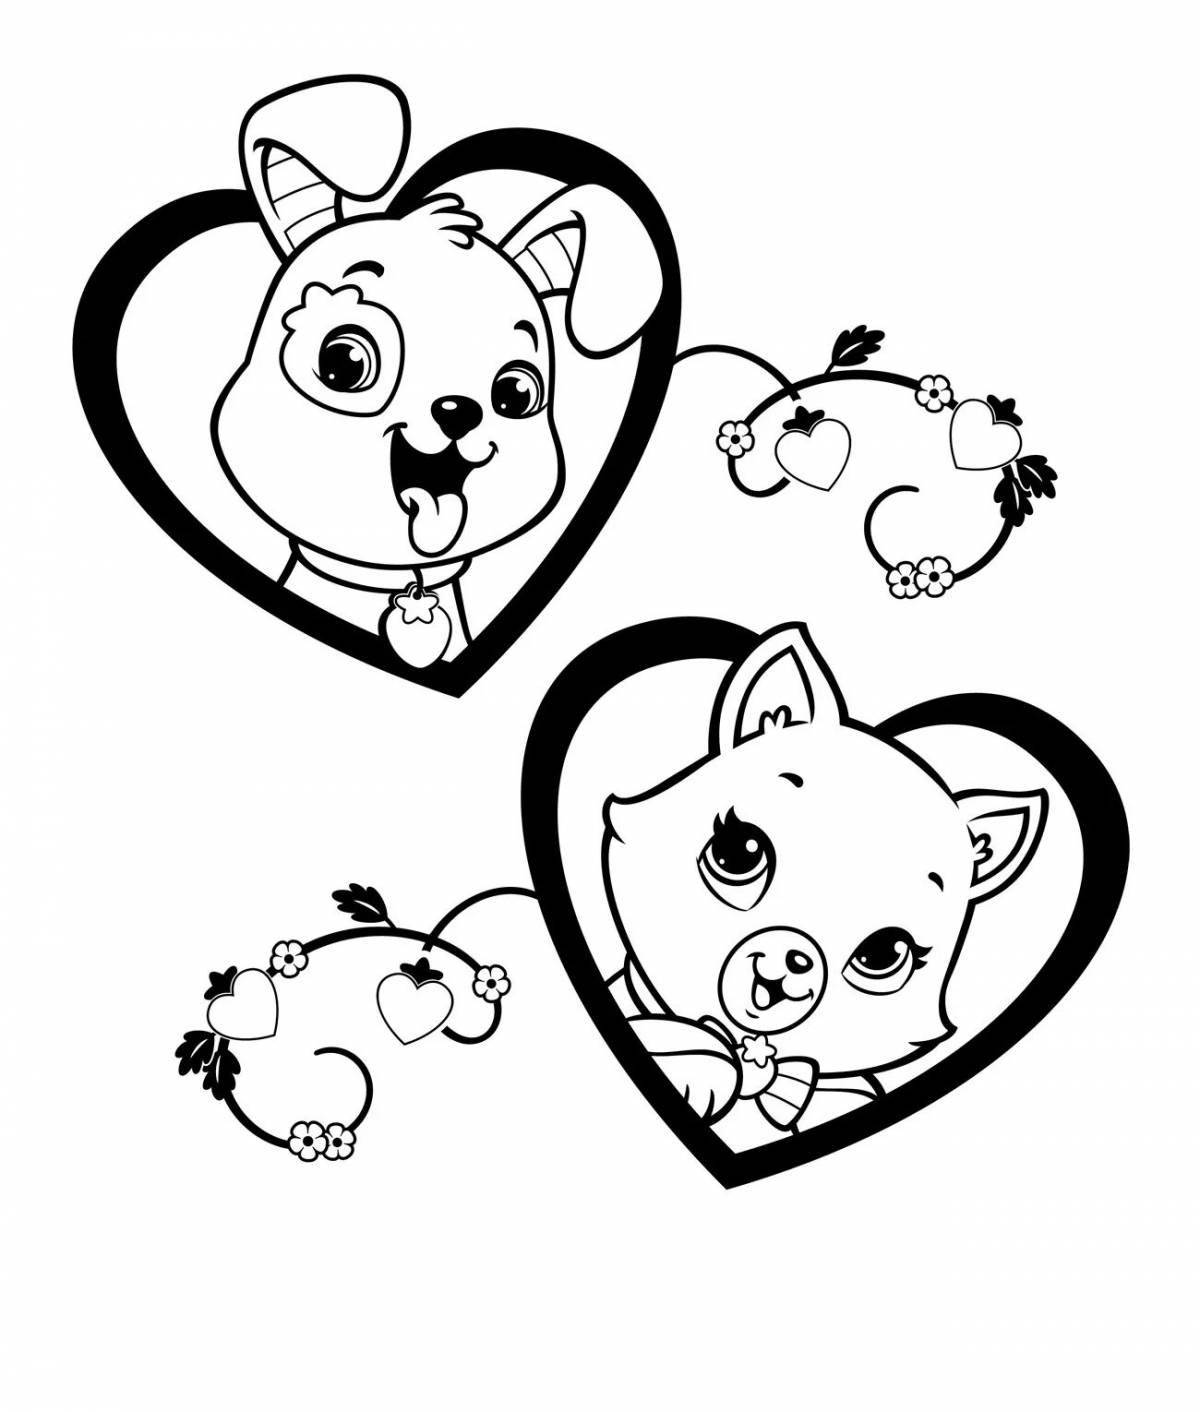 Joyful cat and puppy coloring page